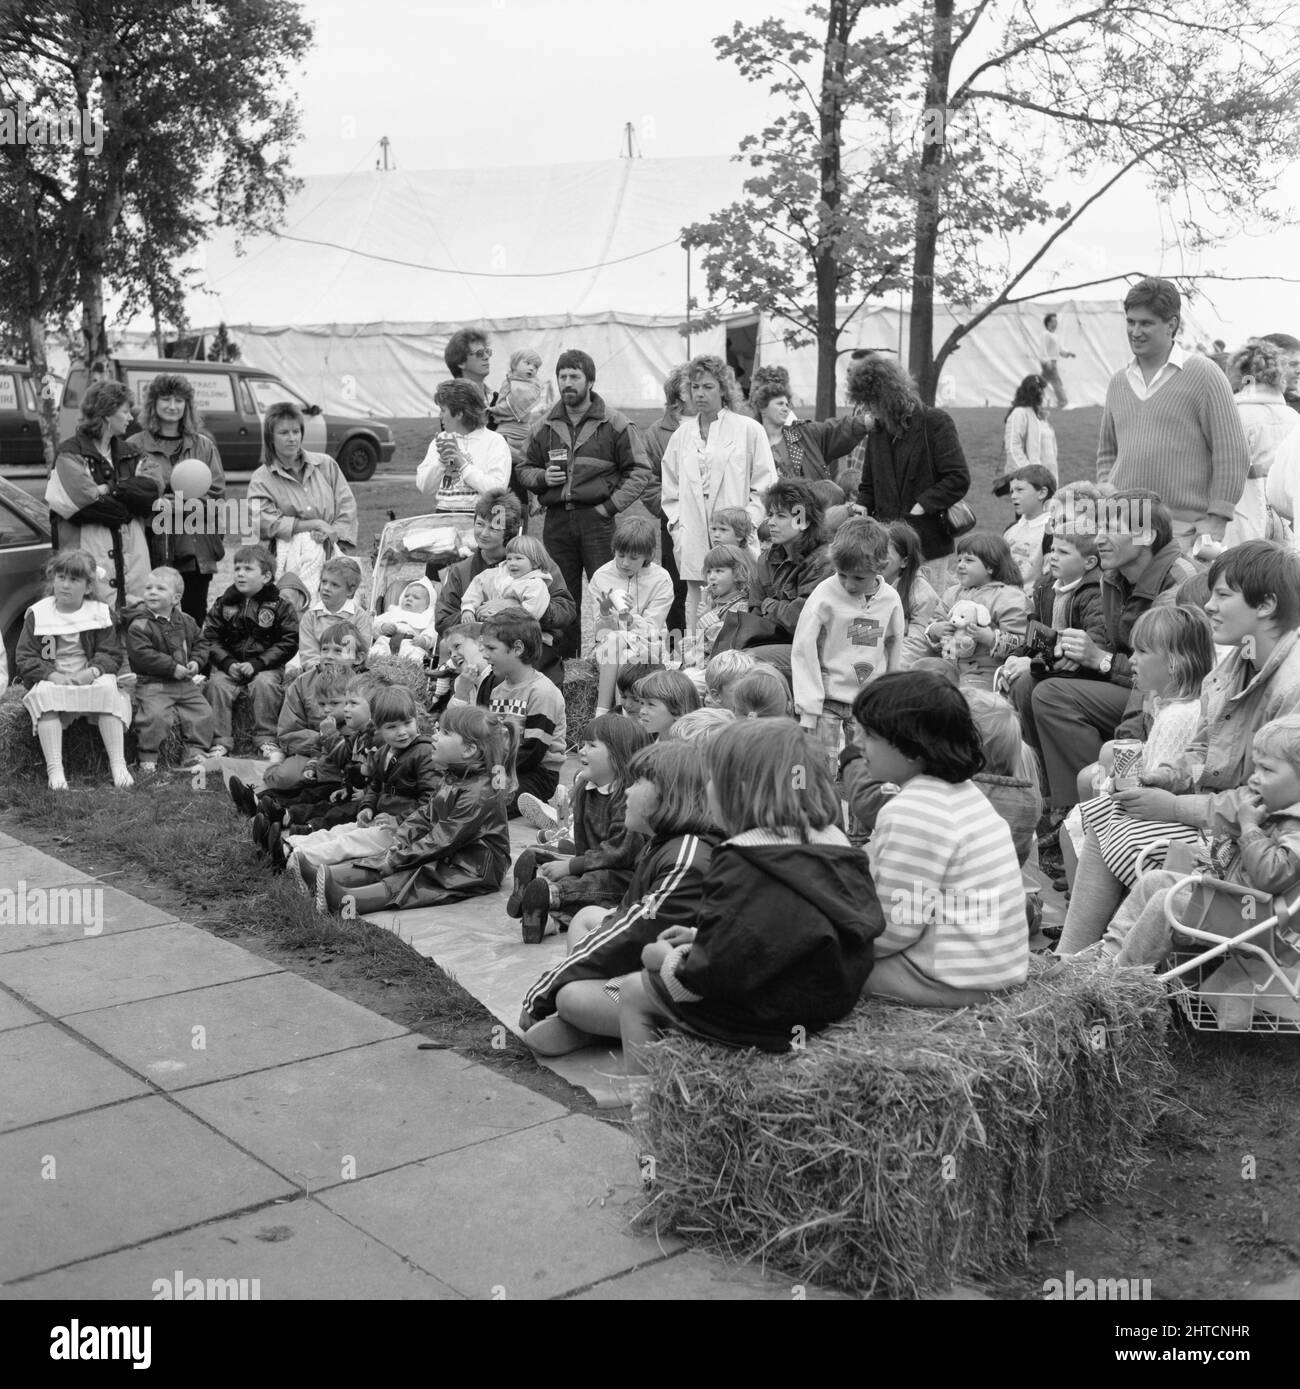 Laing Sports Ground, Rowley Lane, Elstree, Barnet, London, 11/06/1988. The audience of children and their parents for the Punch &amp; Judy show at the 1988 Family Day at Laing's Sports Ground. Attractions at that year's Family Day included; a parade of vintage cars, helicopter rides, plate smashing, stalls, an 'It's a Knockout' style competition and tennis and six-a-side football tournaments.  The event was opened by John Conteh, former world light heavy weight champion and ended with a barbecue and disco. Stock Photo